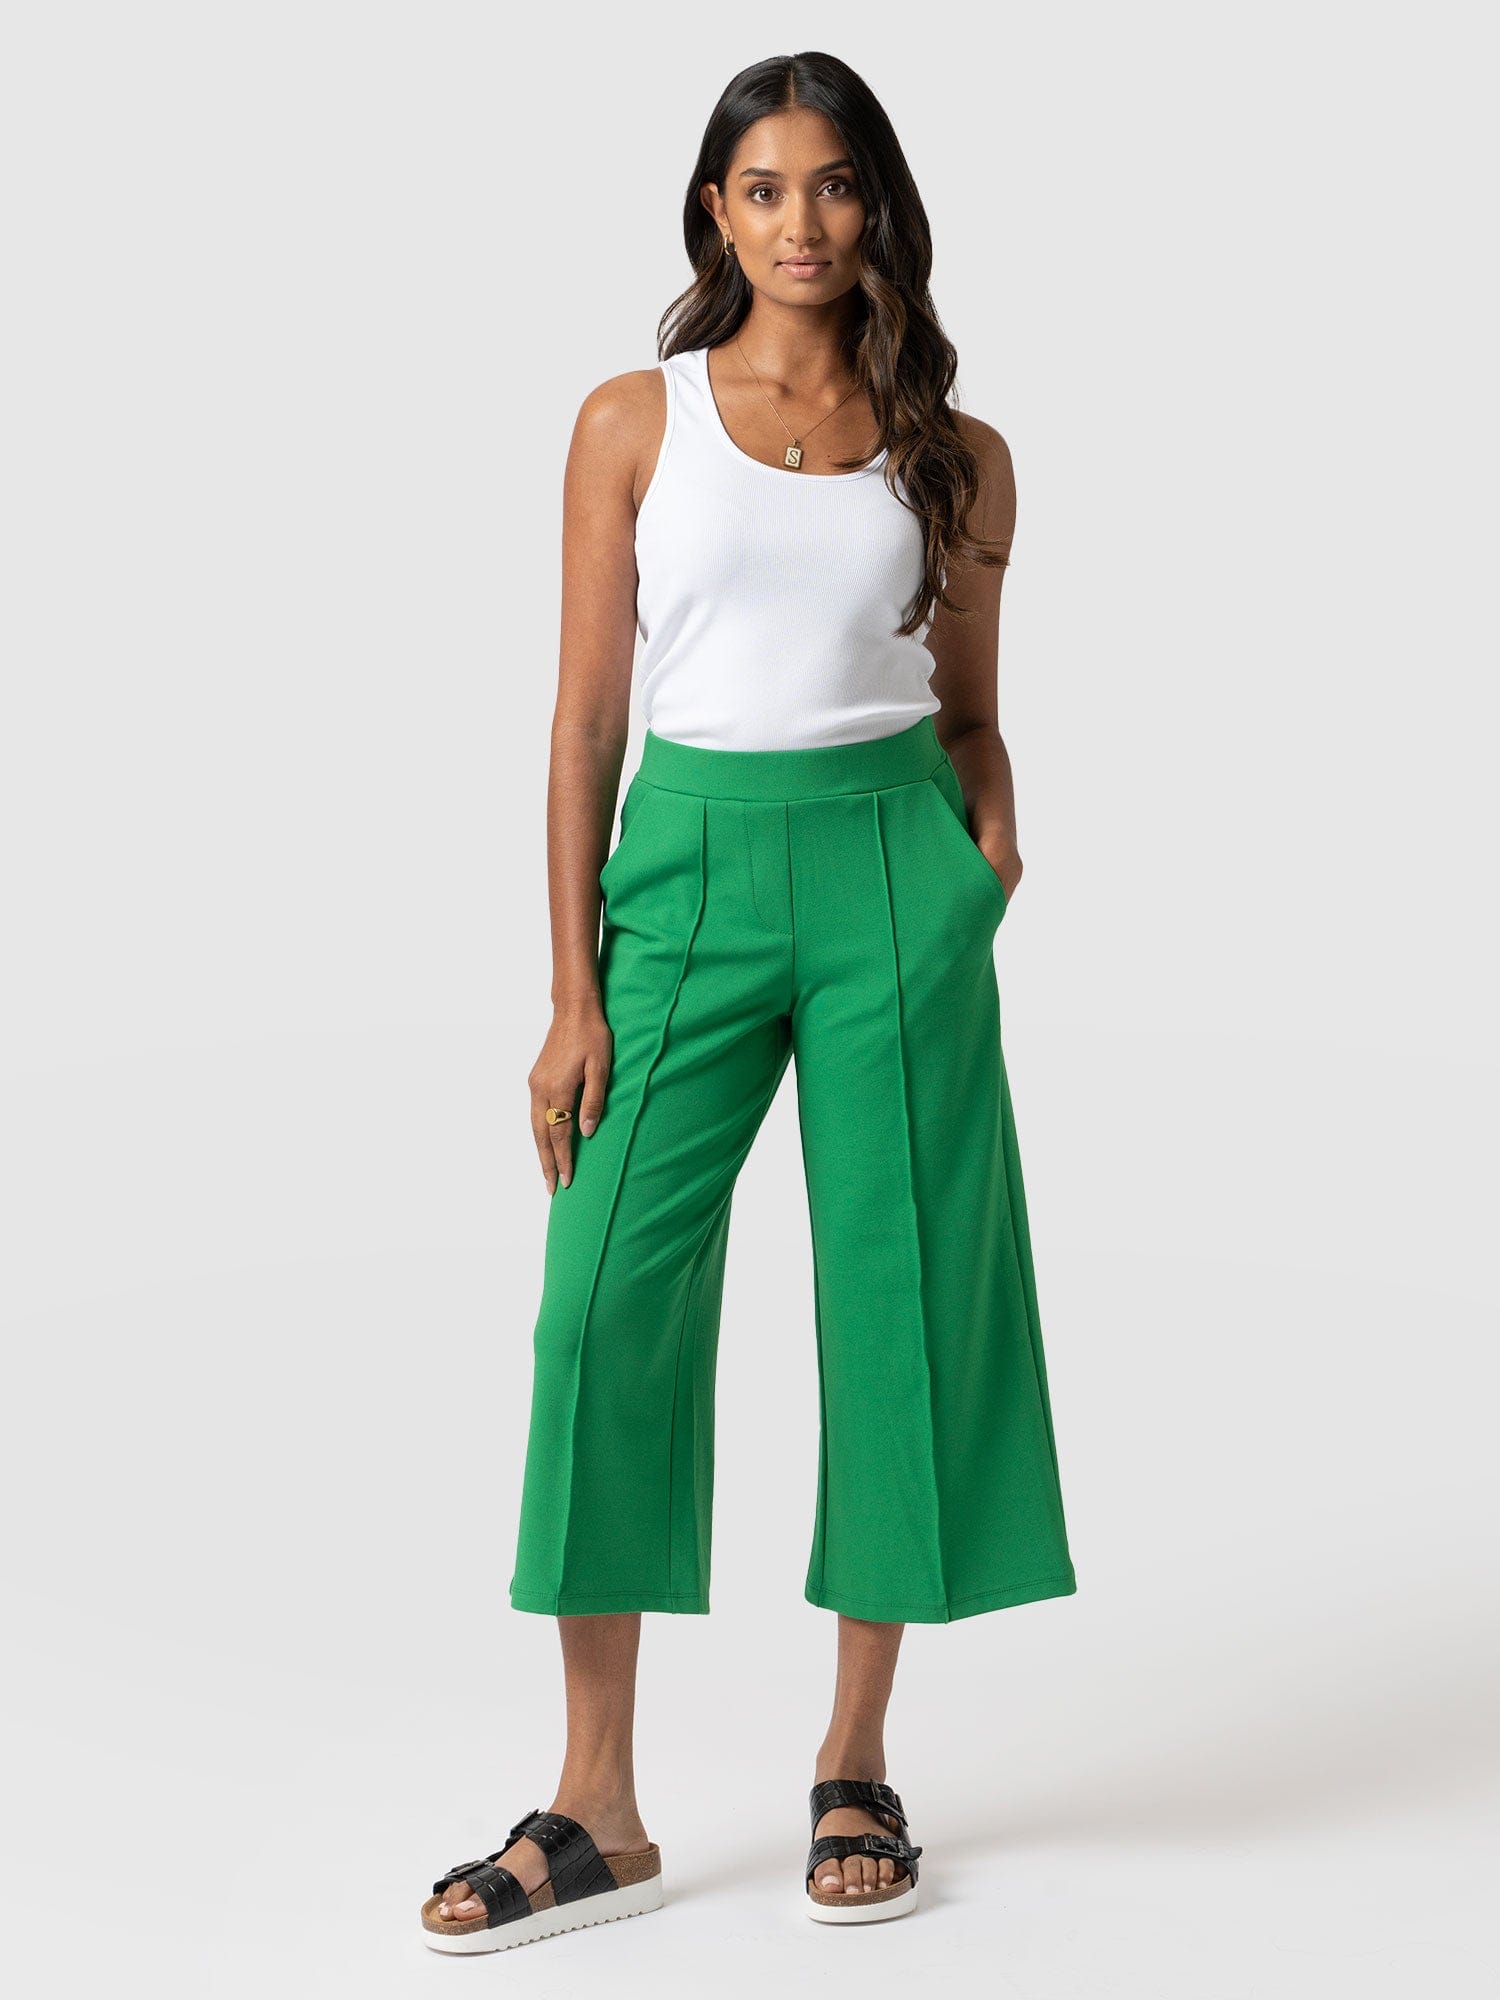 Women Wide Leg Pants Long Casual Summer Flare High Waist Elastic Striped  Loose Culotte Trousers Cropped Pants Mujer Pantalones